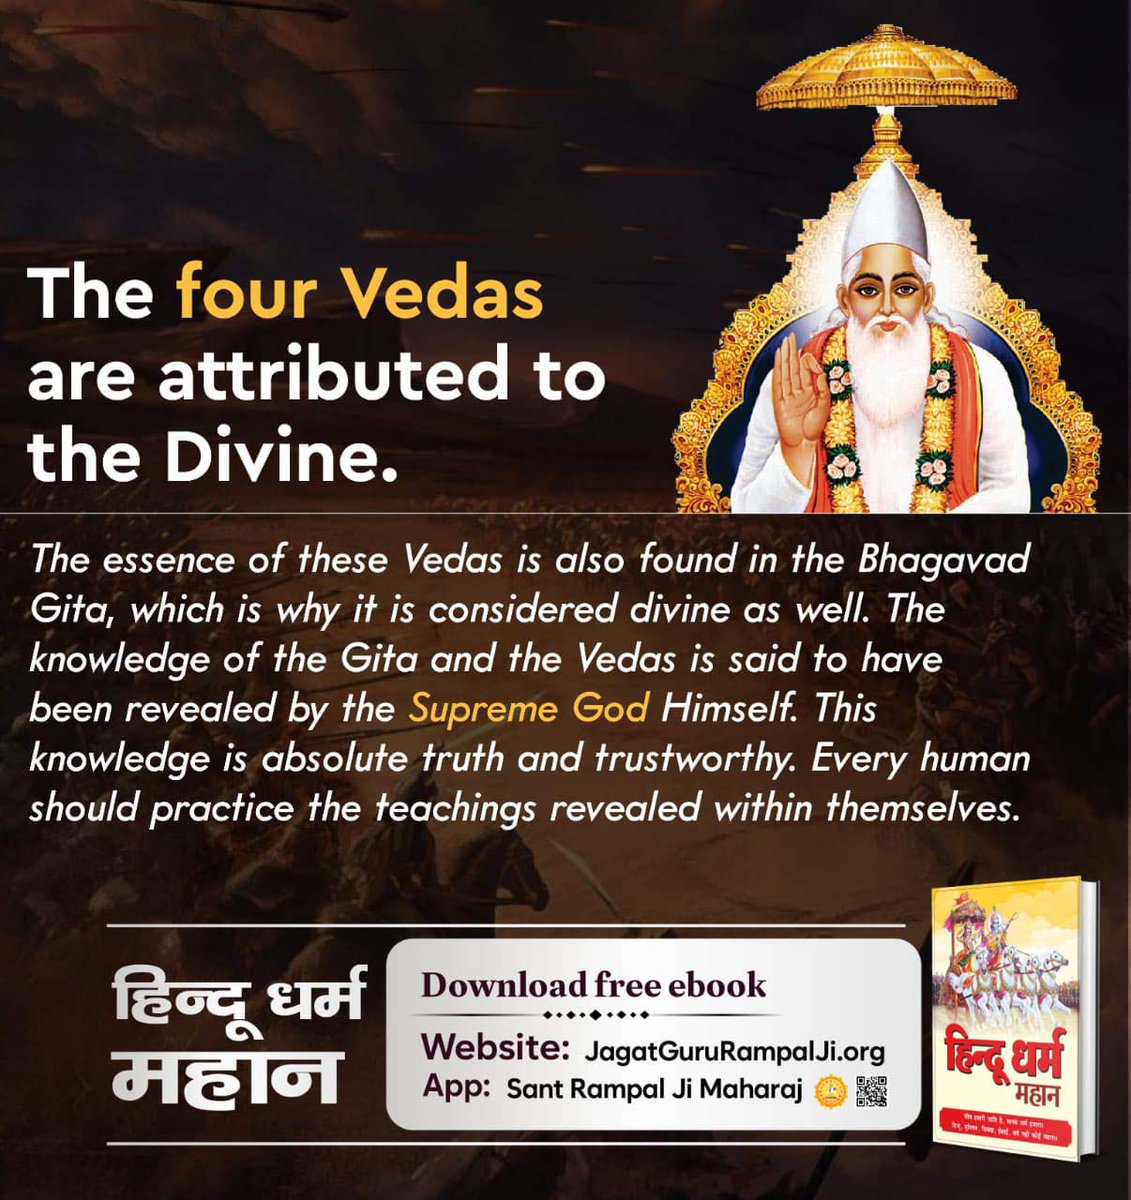 The four veds are attributed to the divine 
#आओ_जानें_सनातन_को

Sant Rampal Ji Maharaj